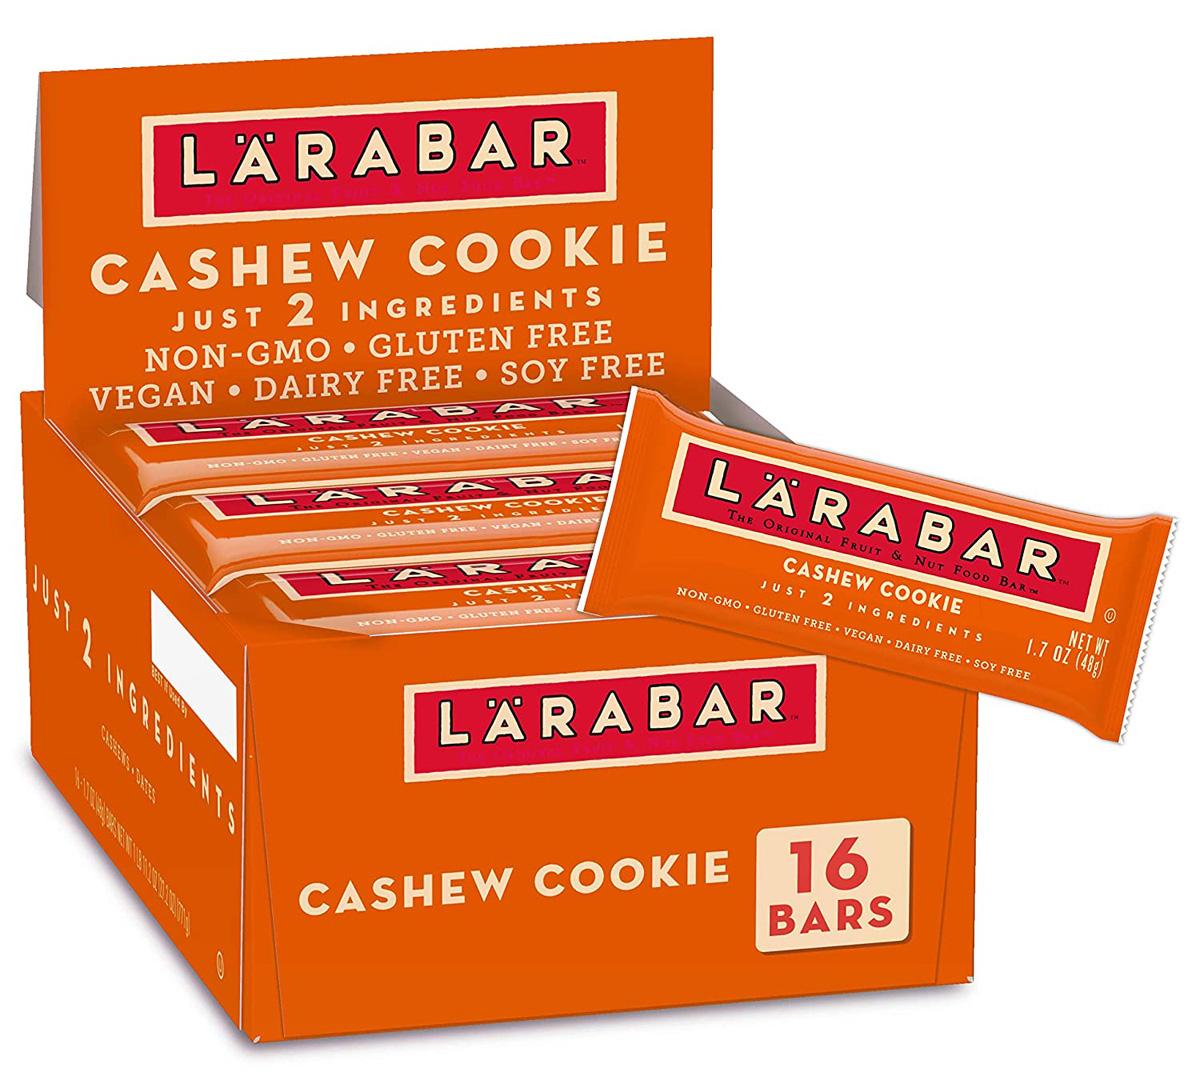 16 Larabar Fruit and Nut Bar Cashew Cookie Flavor for $7.65 Shipped